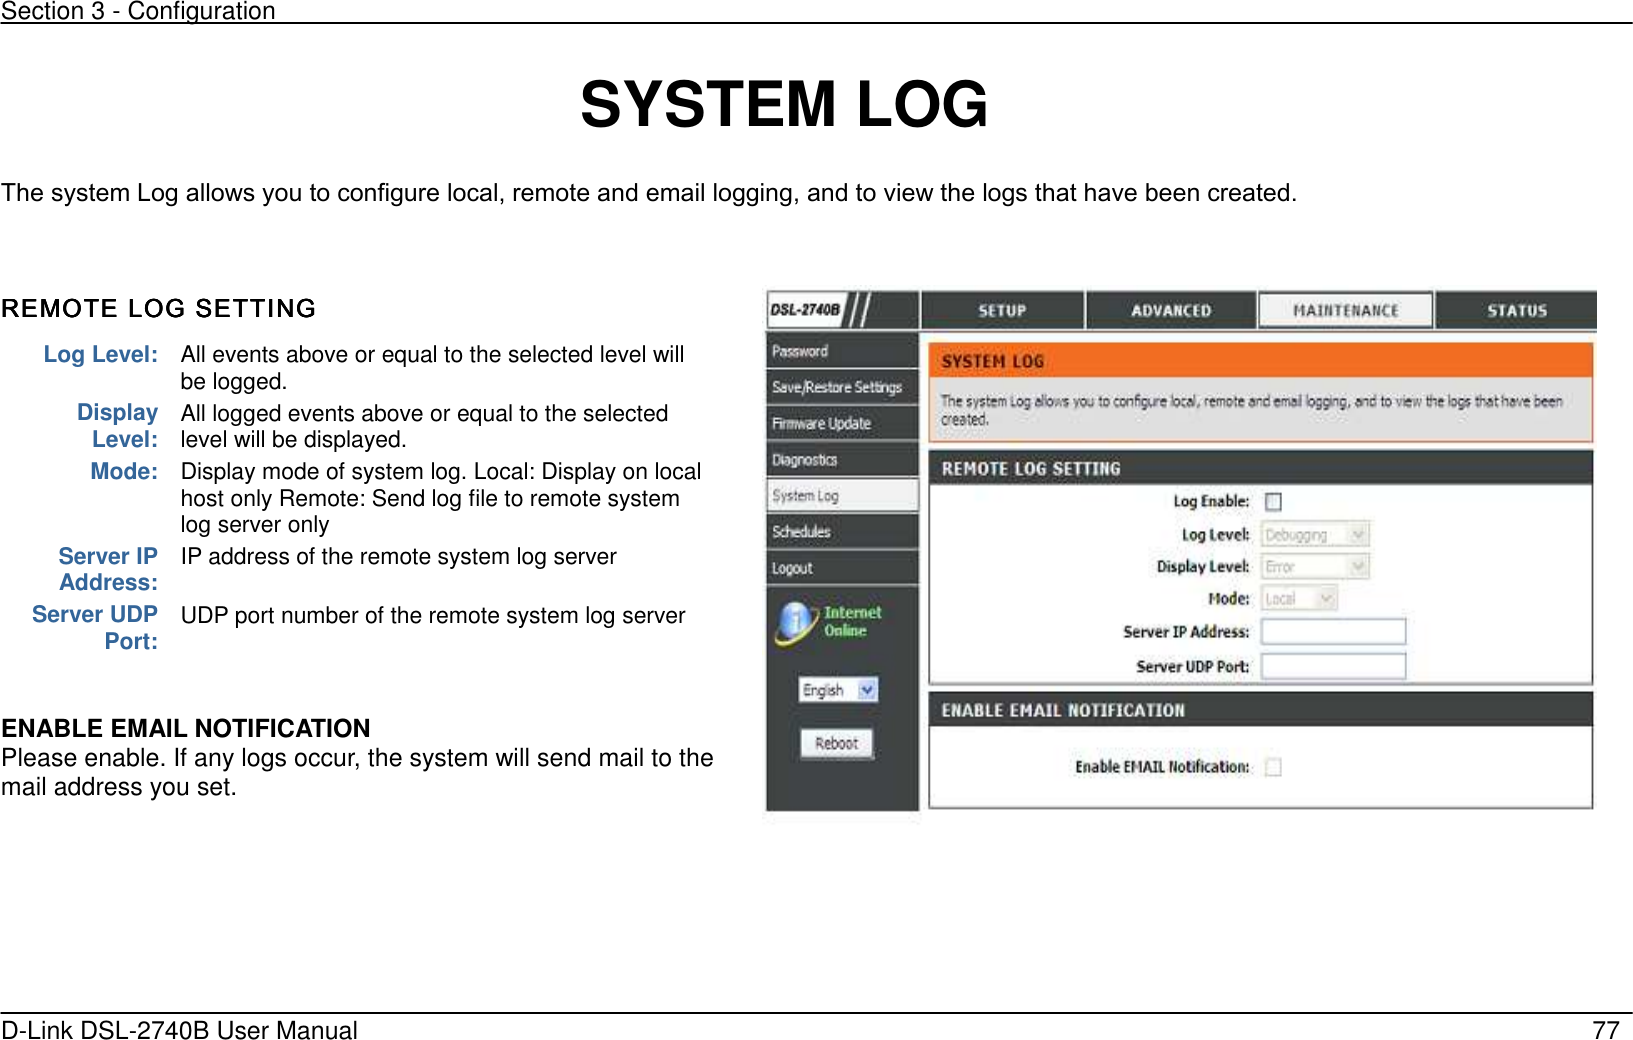 Section 3 - Configuration   D-Link DSL-2740B User Manual                                                  77  SYSTEM LOG The system Log allows you to configure local, remote and email logging, and to view the logs that have been created.    REMOTE LOG SETTINGREMOTE LOG SETTINGREMOTE LOG SETTINGREMOTE LOG SETTING      ENABLE EMAIL NOTIFICATION Please enable. If any logs occur, the system will send mail to the mail address you set.   Log Level: All events above or equal to the selected level will be logged.   Display Level: All logged events above or equal to the selected level will be displayed. Mode: Display mode of system log. Local: Display on local host only Remote: Send log file to remote system log server only Server IP Address: IP address of the remote system log server   Server UDP Port: UDP port number of the remote system log server    